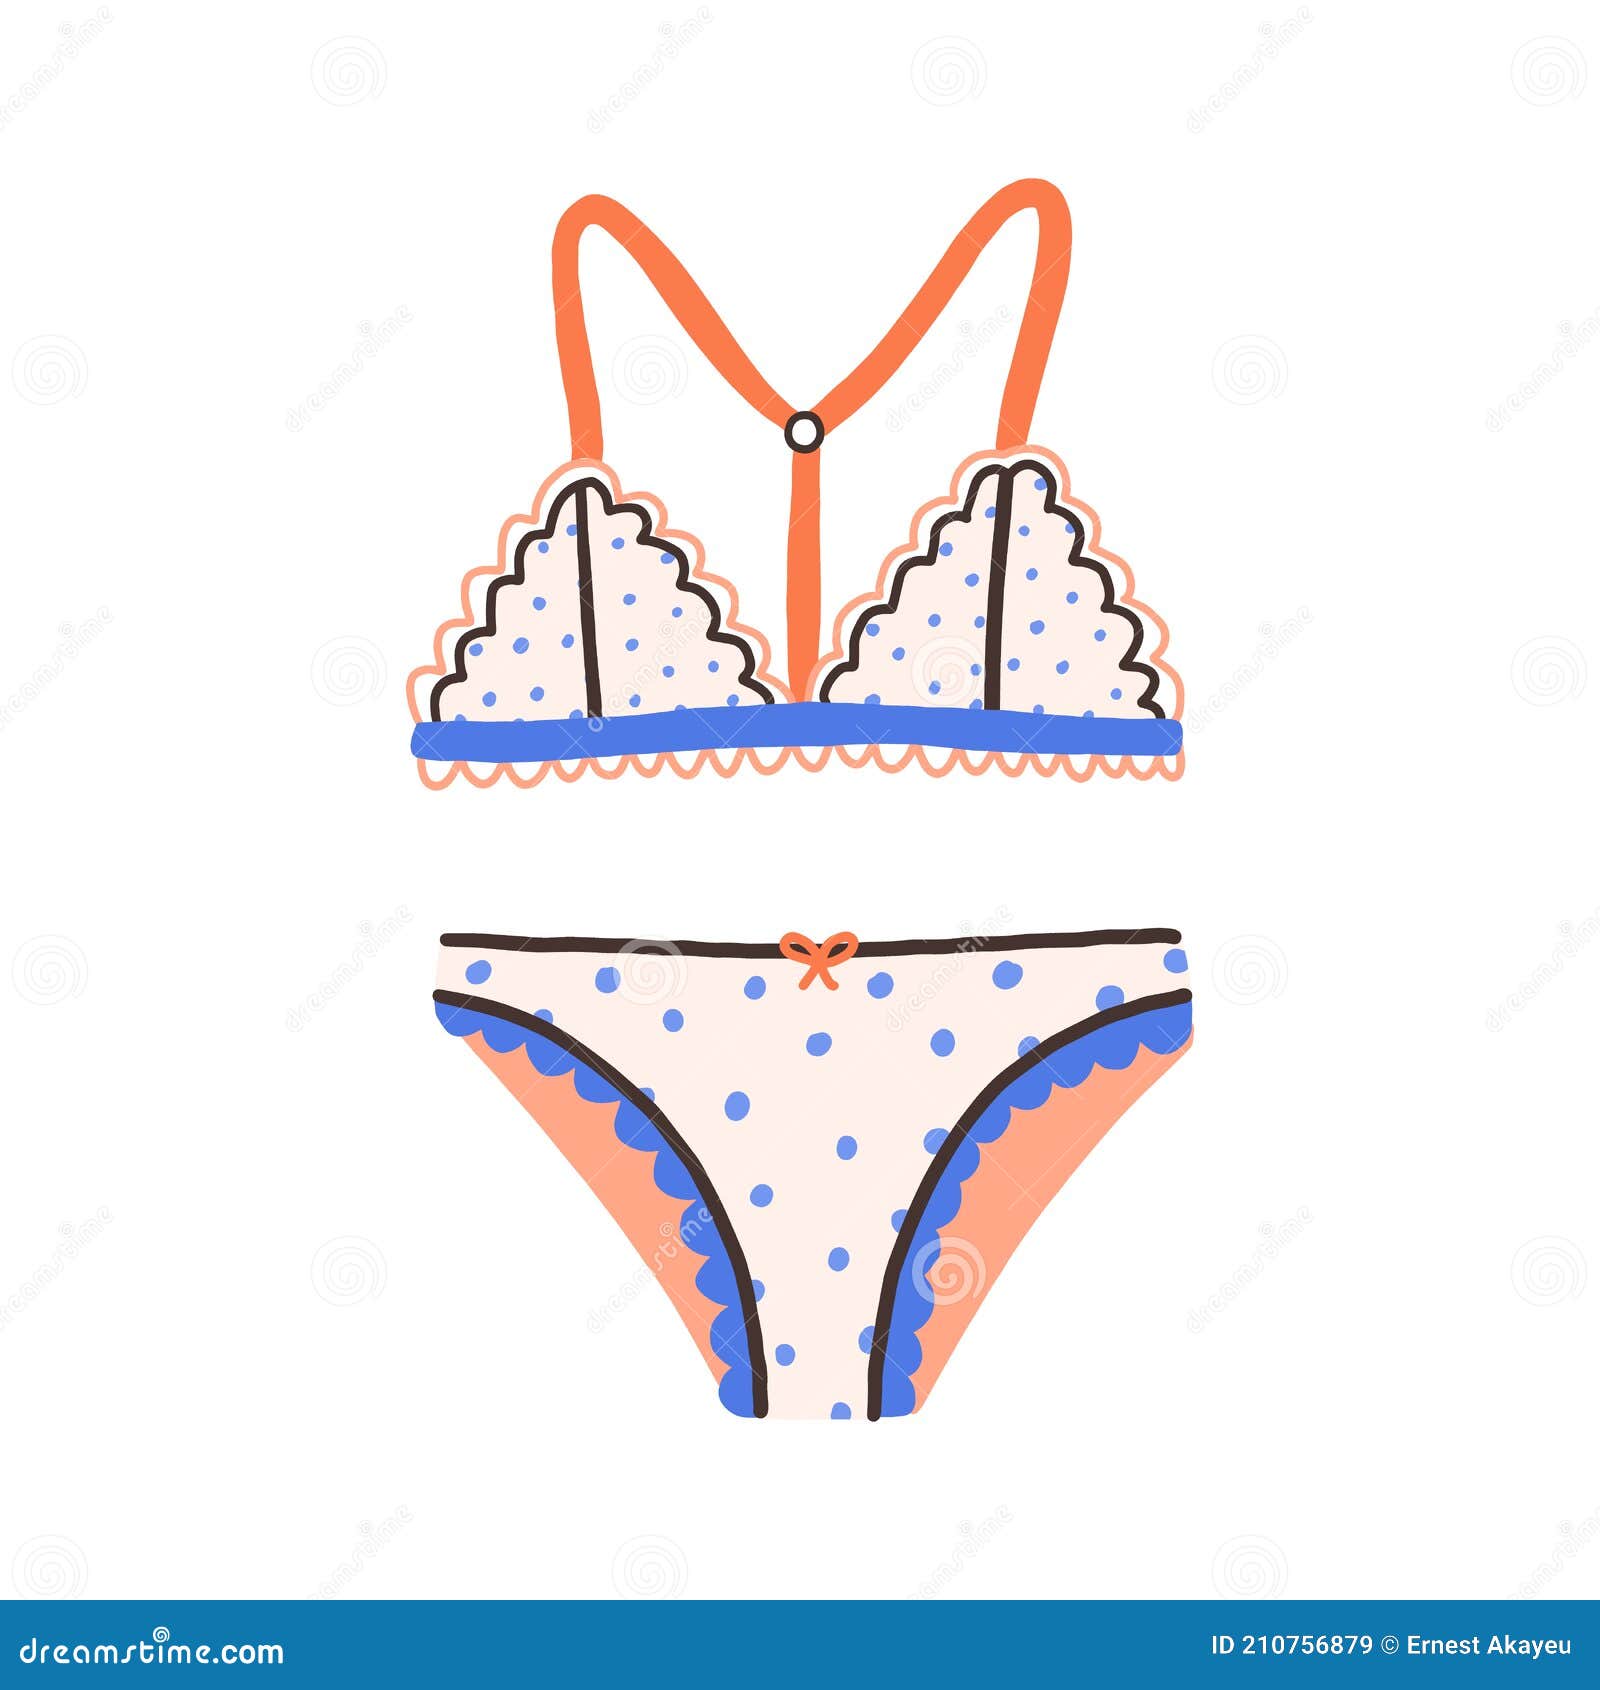 Female Underwear with Polka Dot Pattern. Elegant Cute Lingerie with Wireless  Bra and Panties Stock Vector - Illustration of romantic, underwear:  210756879